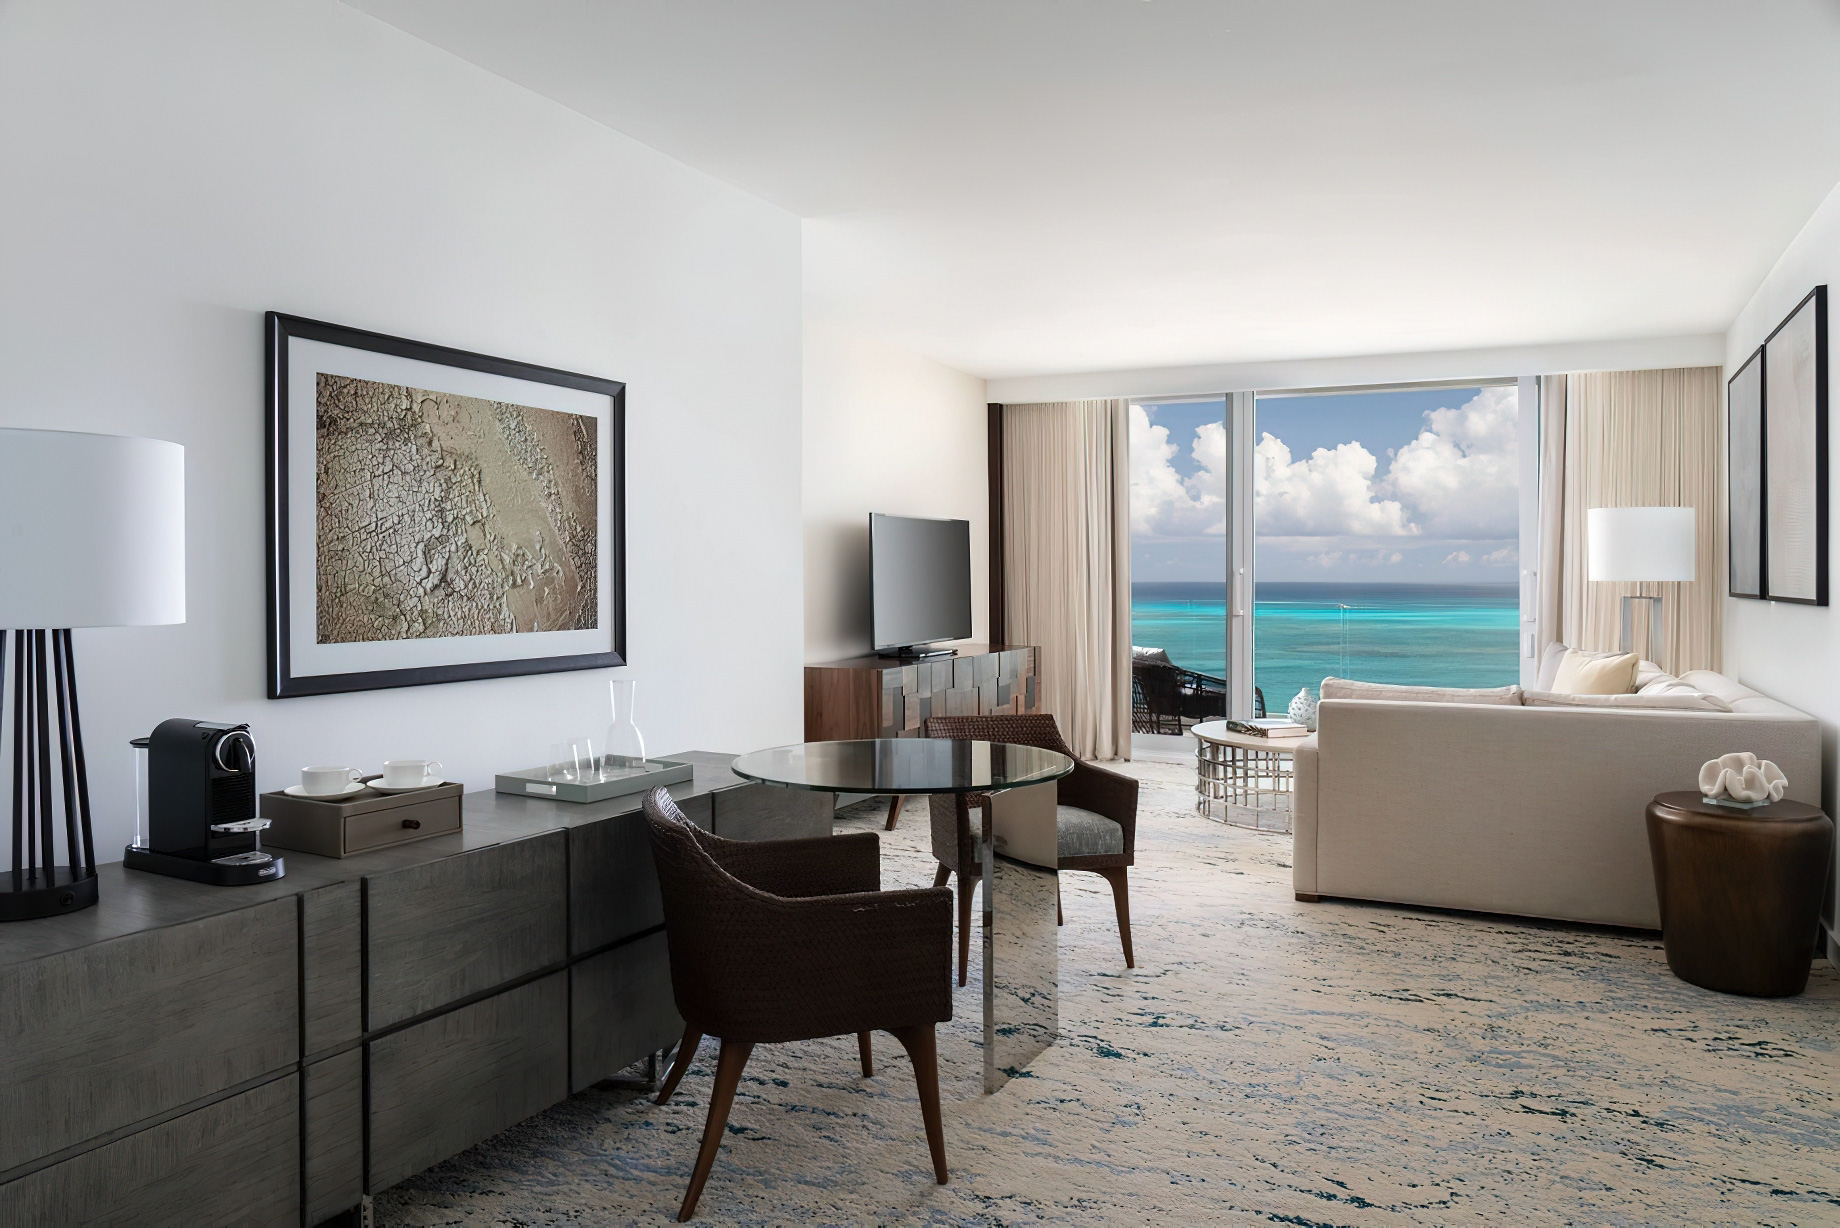 The Ritz-Carlton, Turks & Caicos Resort – Providenciales, Turks and Caicos Islands – Executive Suite Oceanfront View Living Area